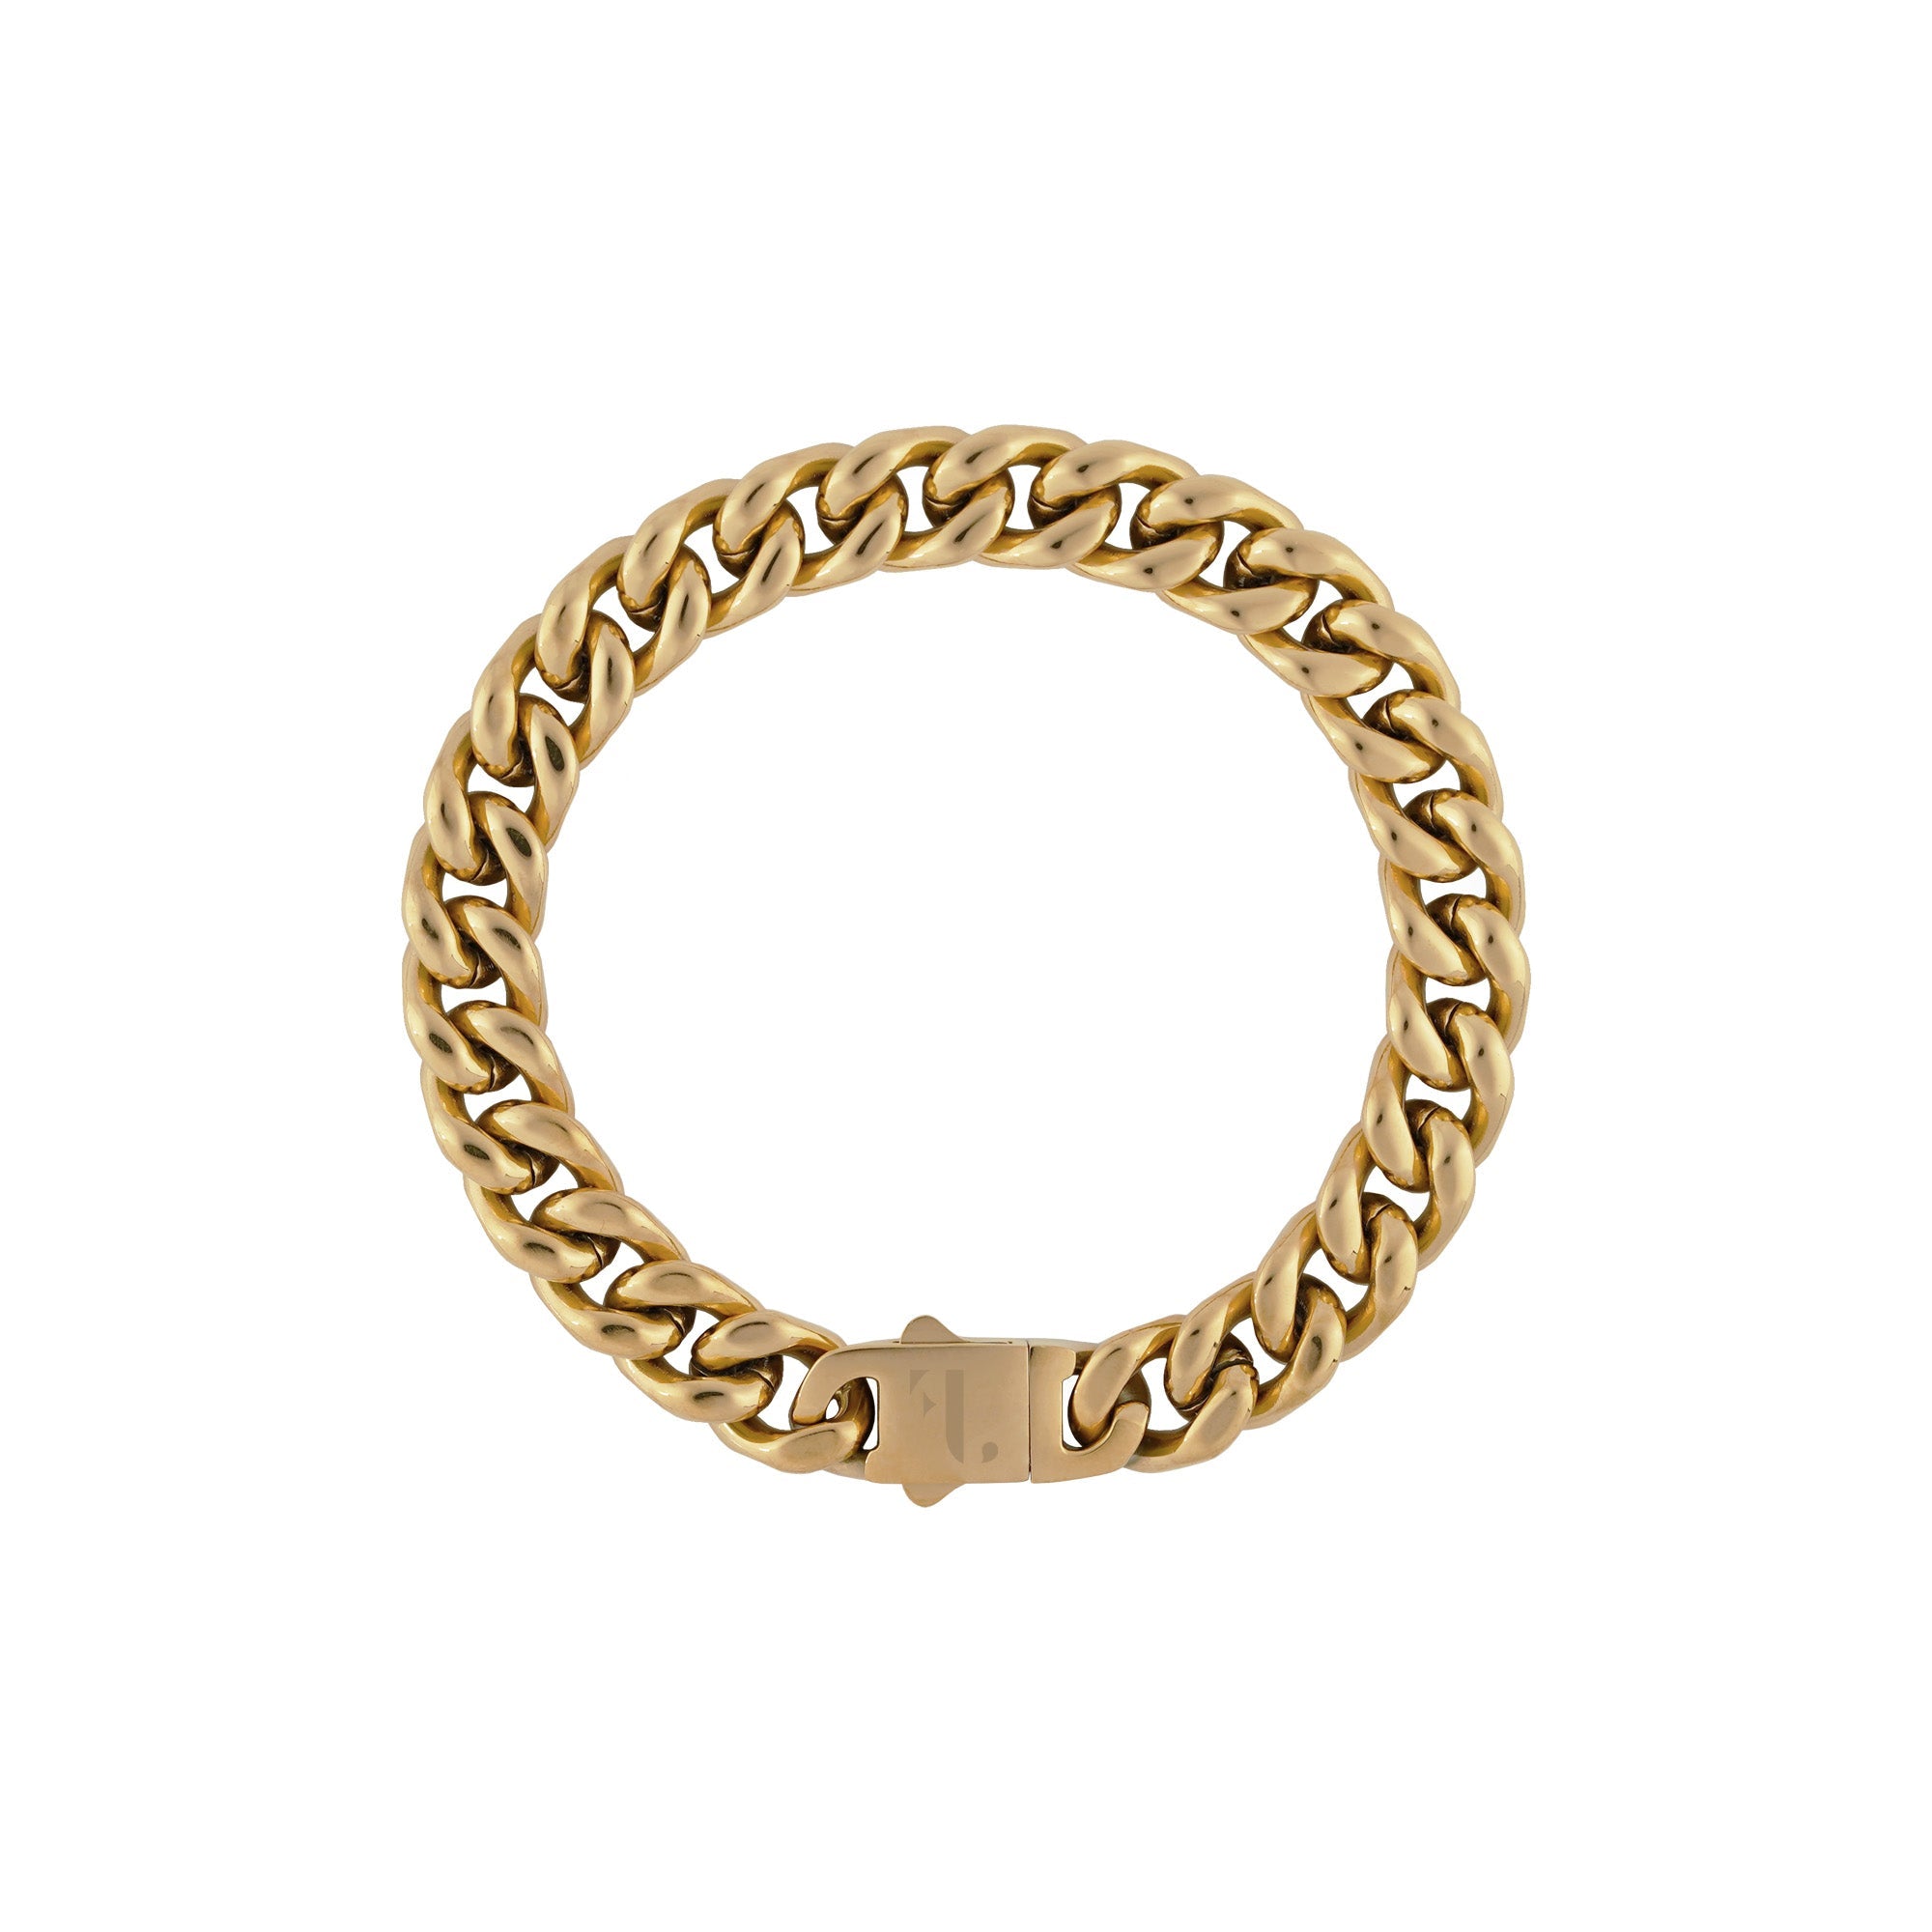 Cass women's bracelet by Five Jwlry, designed with a 10mm tightly woven Cuban link chain in a gold hue, crafted from water-resistant 316L stainless steel. Available in sizes 18cm, 20cm, 22cm, and 24cm. Hypoallergenic and accompanied by a 2-year warranty.